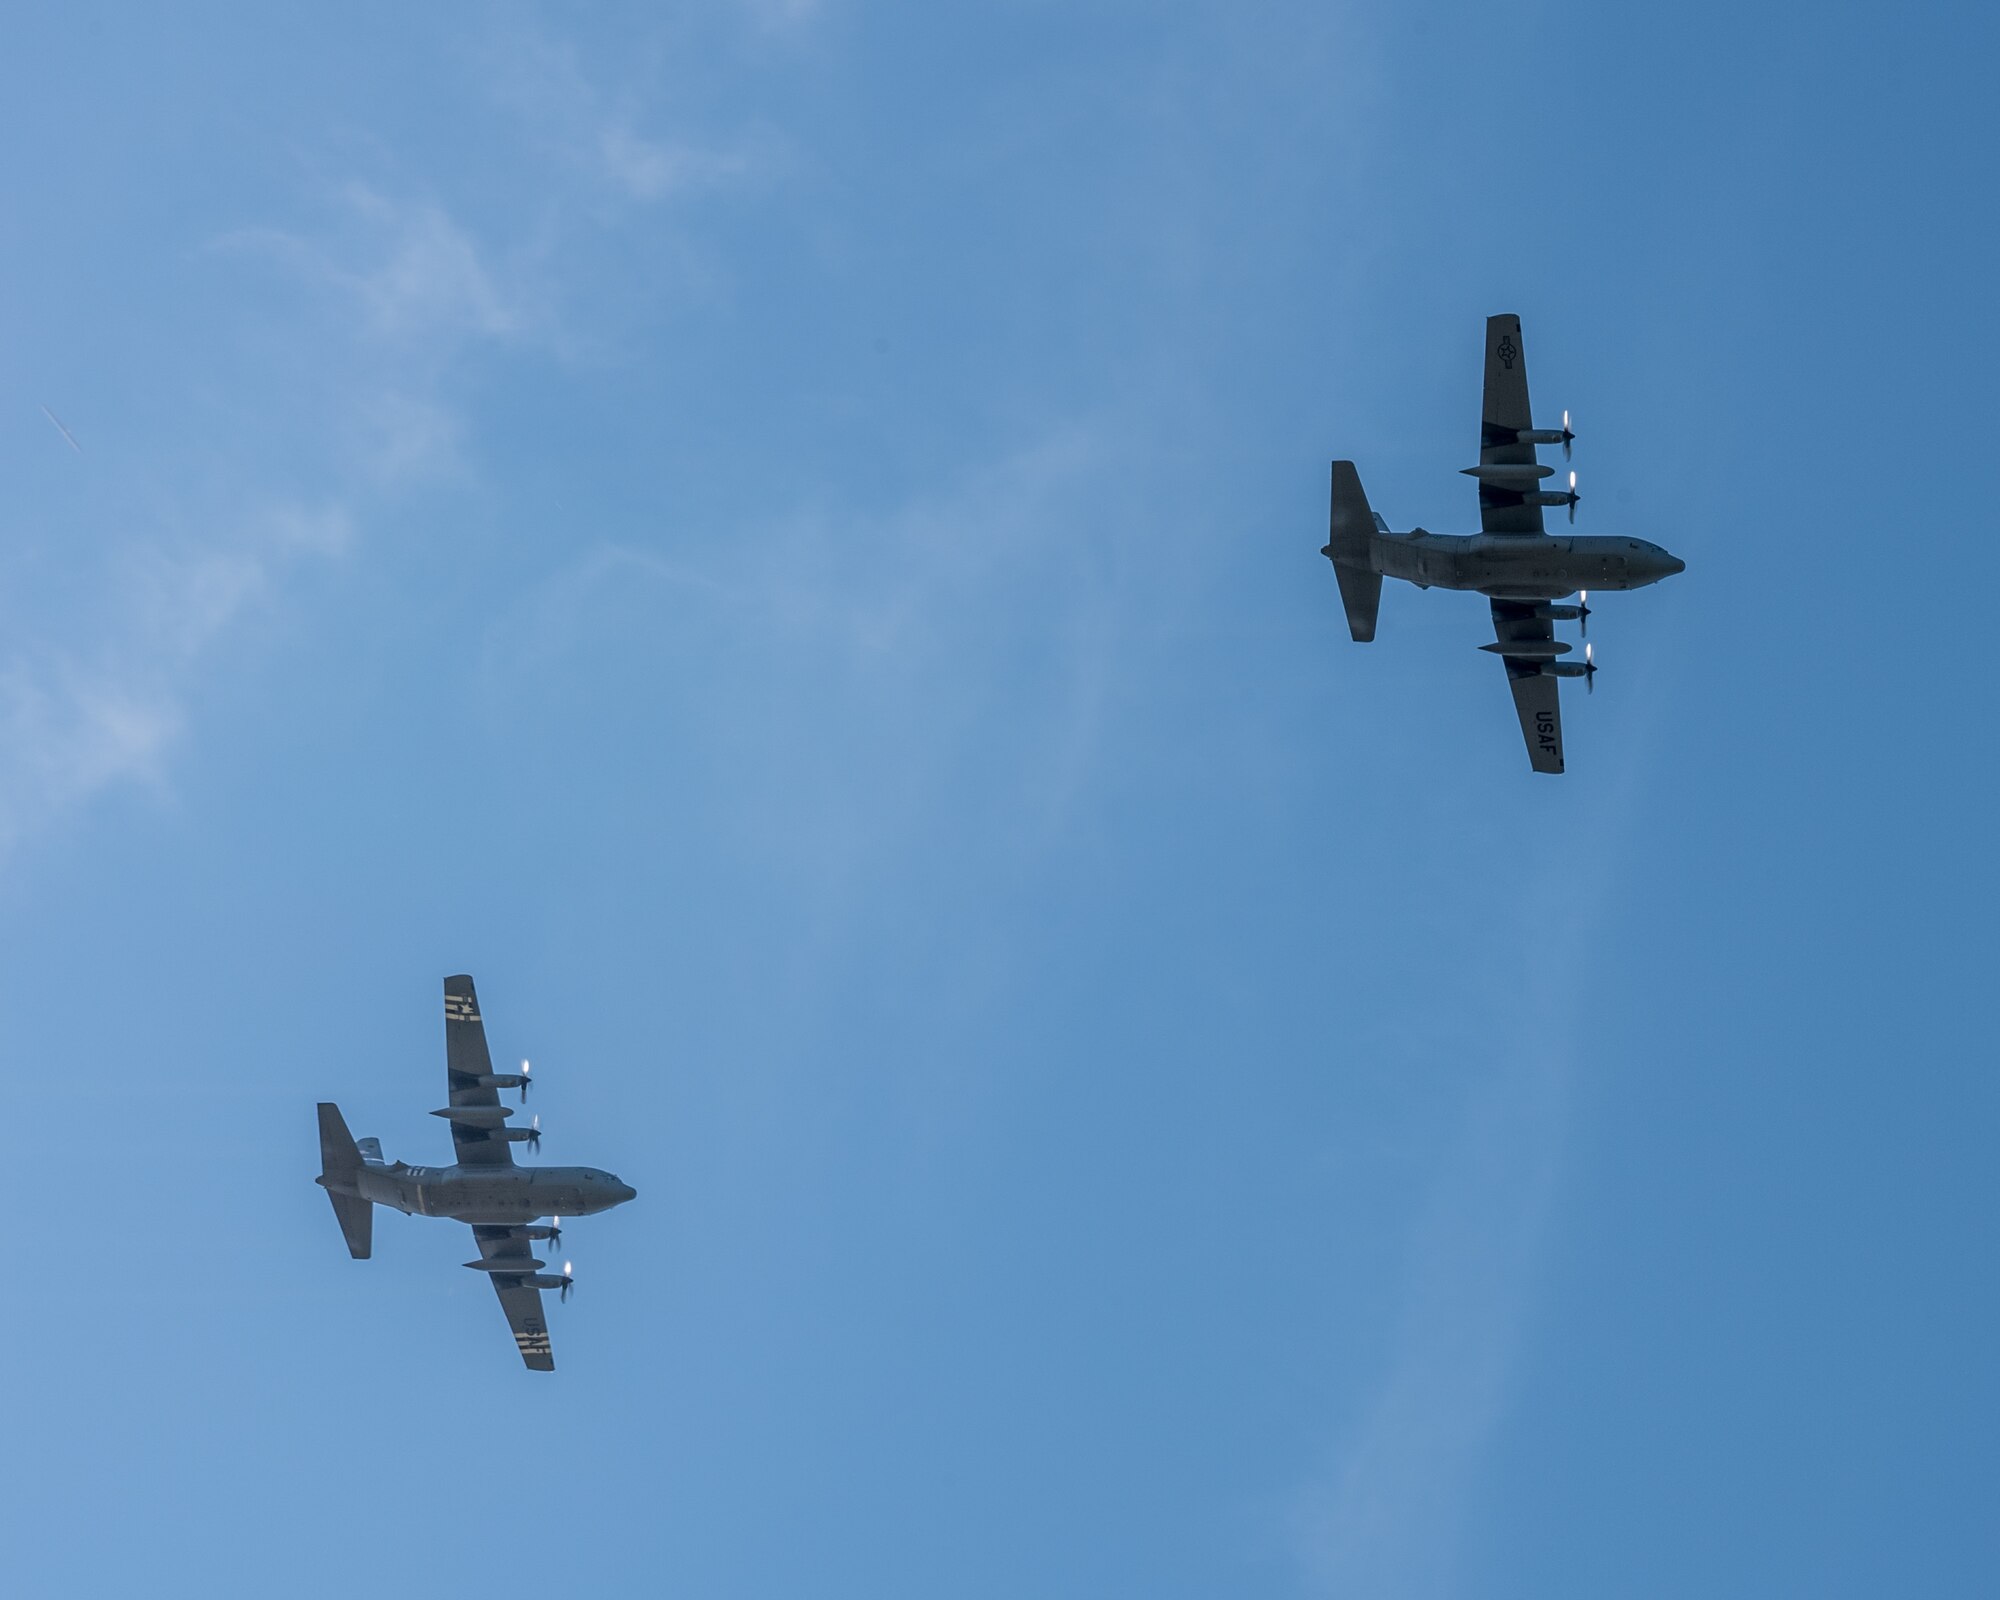 Two Kentucky Air National Guard C-130 Hercules aircraft from the 123rd Airlift Wing fly over Louisville, Ky., May 1, 2020, as part of Operation American Resolve, a nationwide salute to all those supporting COVID-19 response efforts. The operation is intended to lift morale during a time of severe health and economic impacts that have resulted from COVID-19. (U.S. Air National Guard photo by Staff Sgt. Joshua Horton)